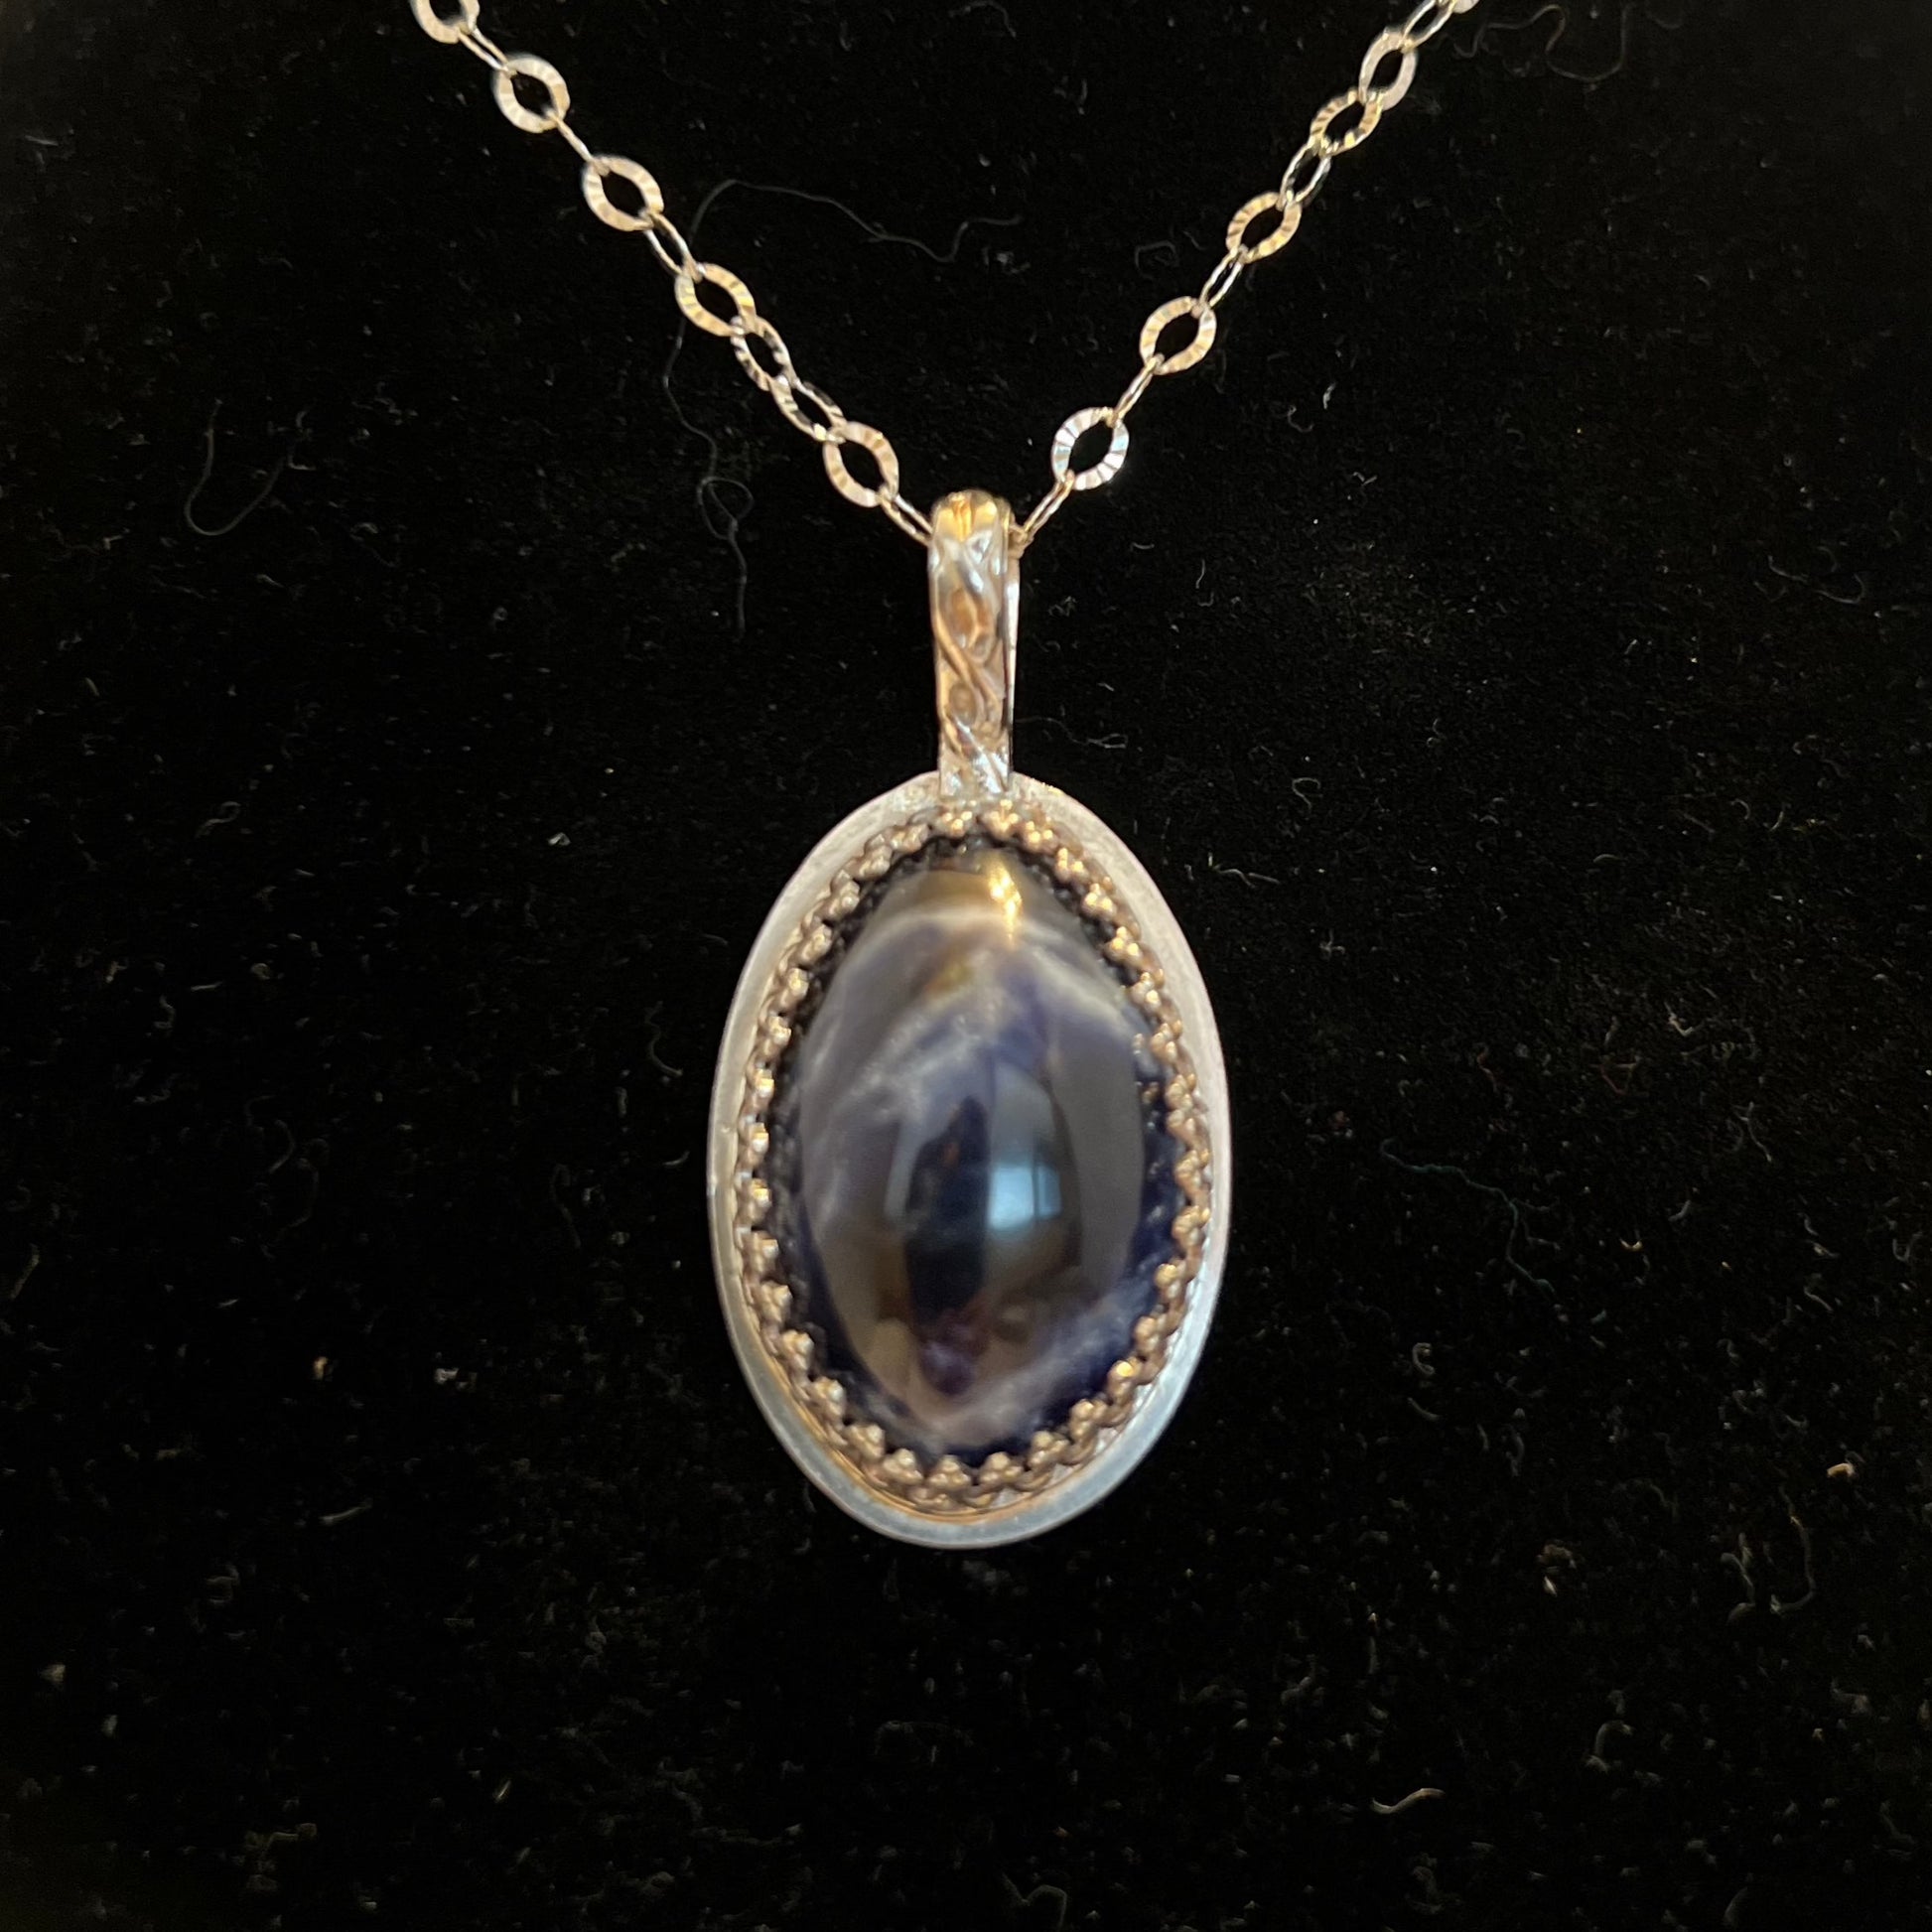 Oval sodalite on sterling silver with 20" sterling silver chain